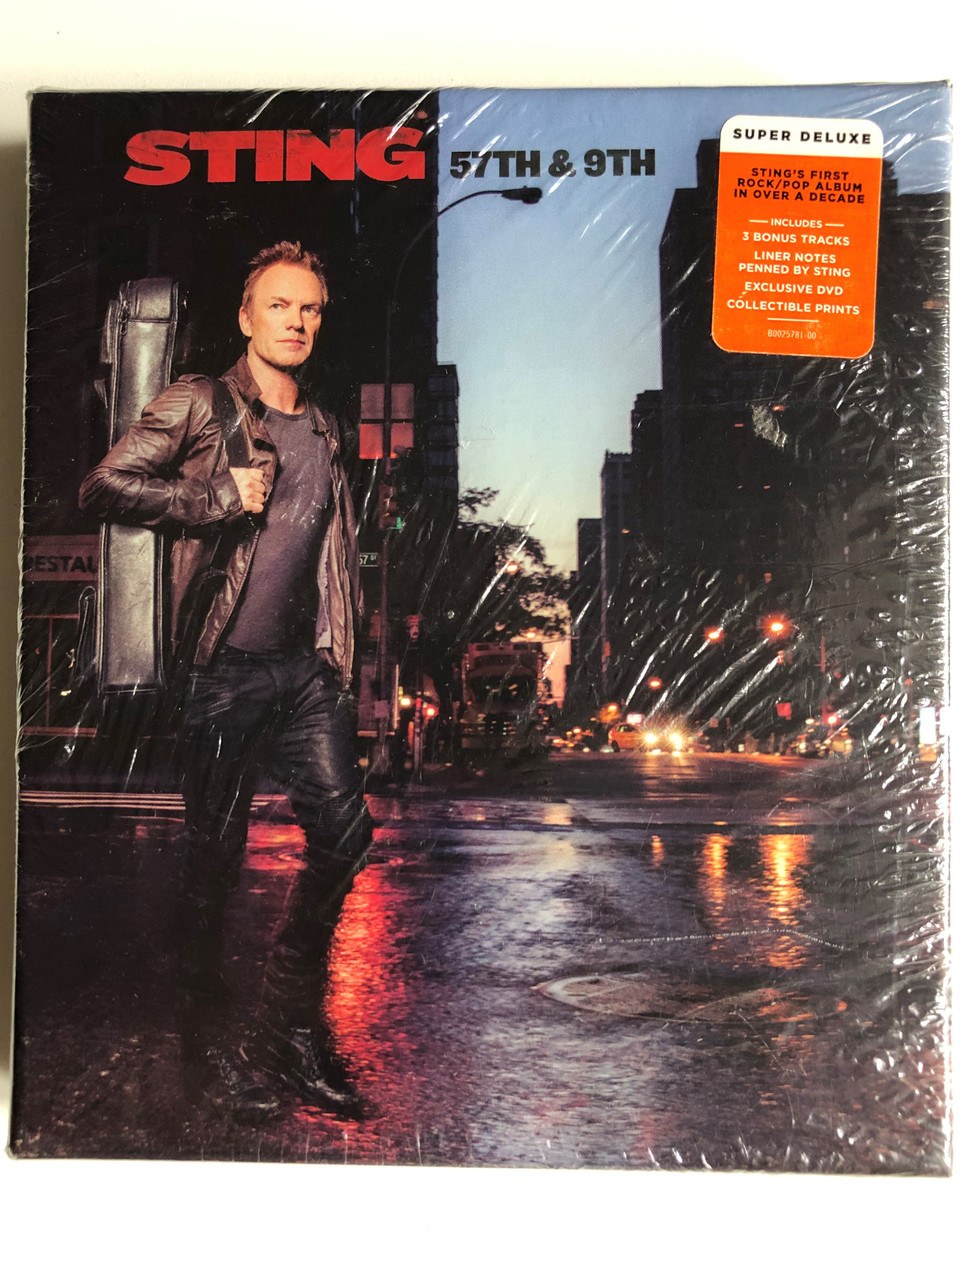 https://cdn10.bigcommerce.com/s-62bdpkt7pb/products/0/images/255899/Sting_57th_9th_Super_Deluxe_Strings_First_RockPop_Album_In_Over_A_Decade_Includes_3_Bonus_Tracks_Liner_Notes_Penned_By_Sting_Exclusive_DVD_Collectible_Prints_AM_Records_Audio_CD_1__50210.1665496605.1280.1280.JPG?c=2&_gl=1*isnarb*_ga*MjA2NTIxMjE2MC4xNTkwNTEyNTMy*_ga_WS2VZYPC6G*MTY2NTQ5NDYwOS41ODkuMS4xNjY1NDk2NTE3LjYwLjAuMA..